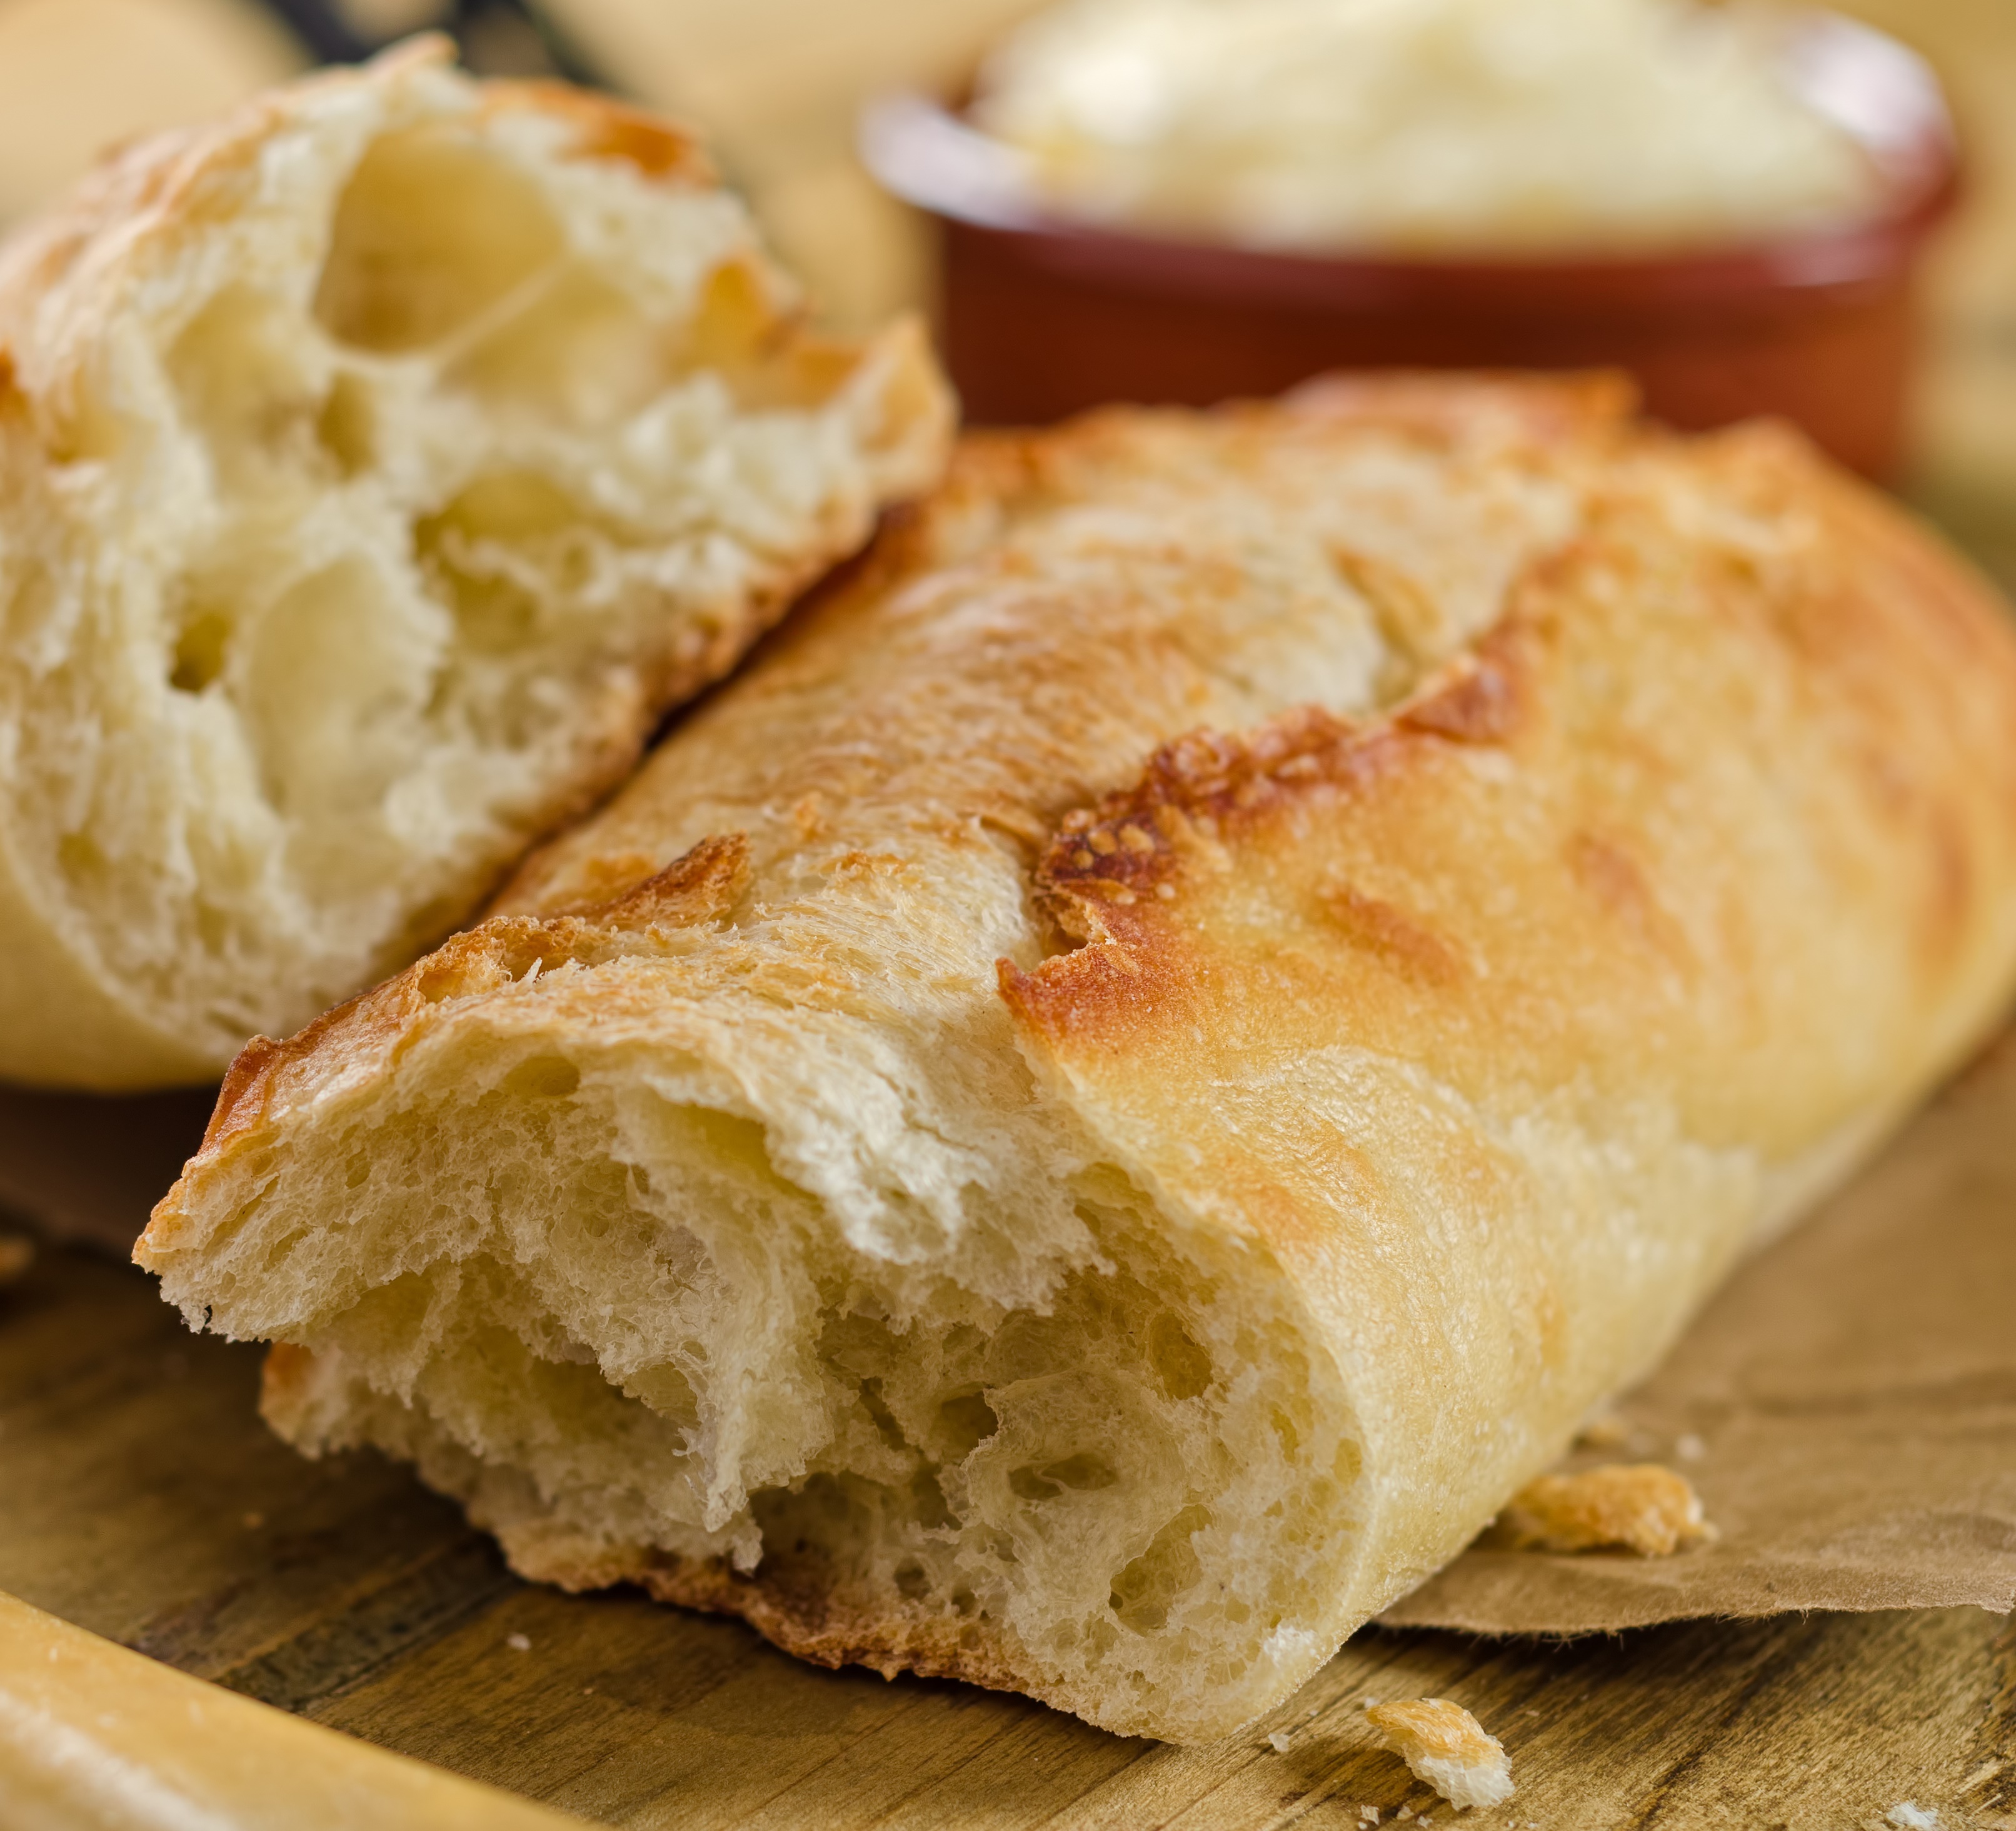 French bread photo